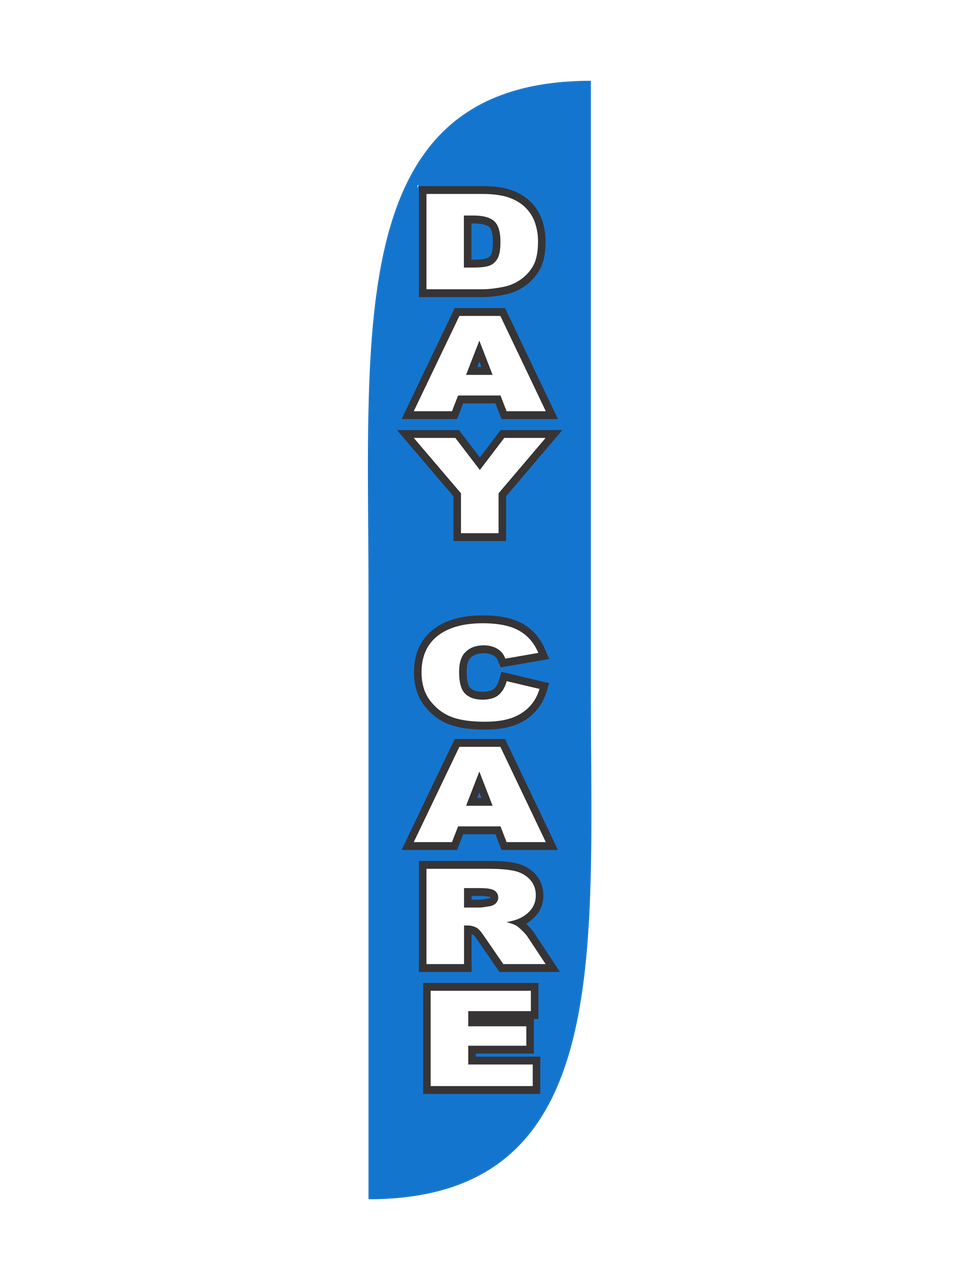 12ft Day Care Feather Flag Blue